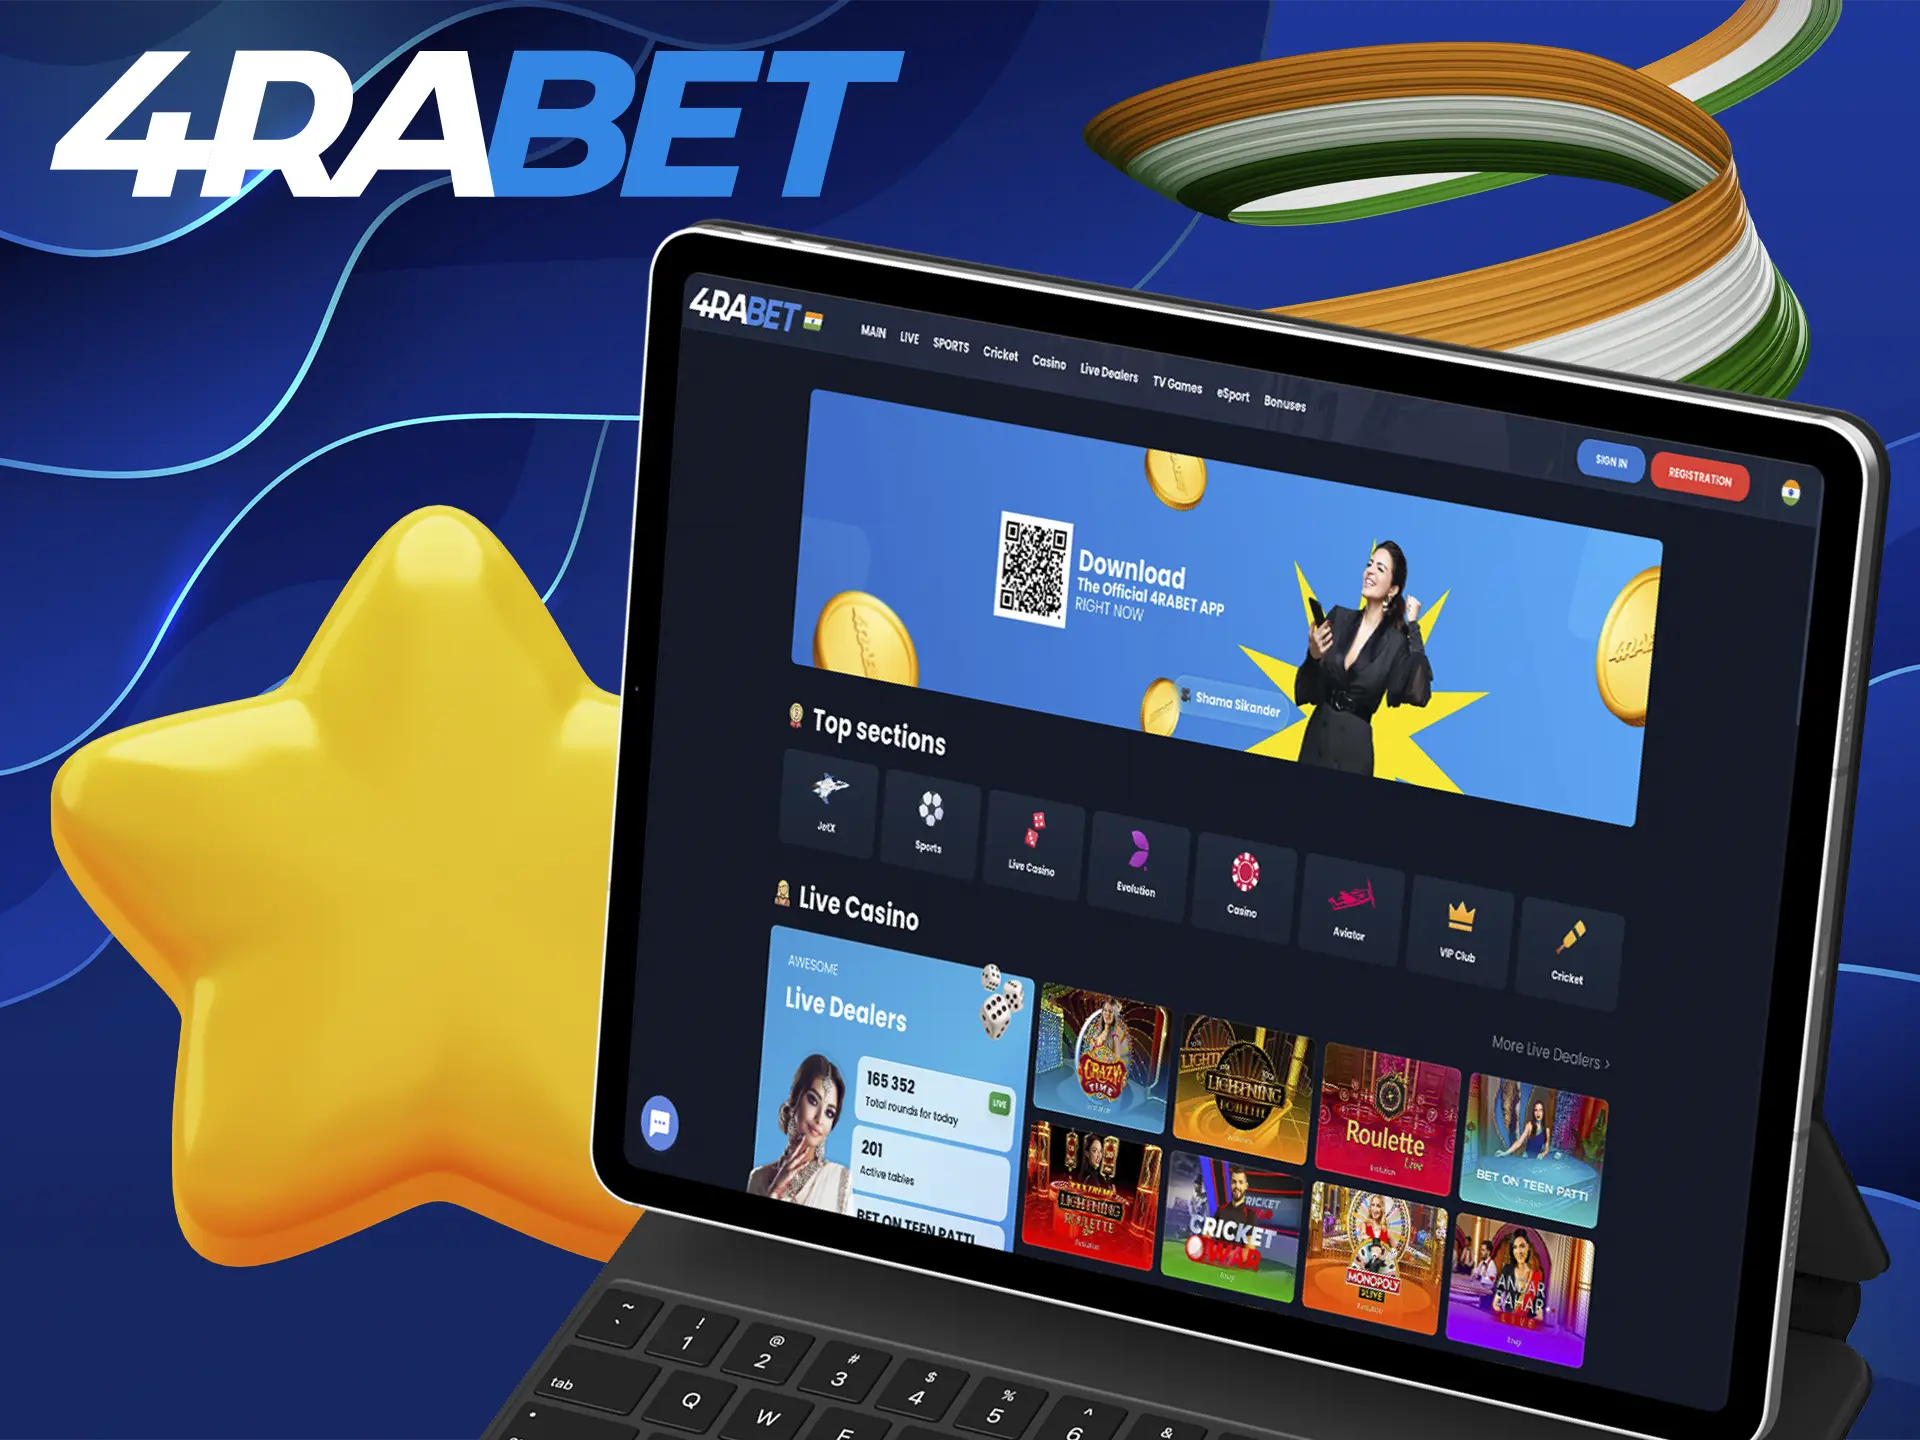 Find out why one of the best bookmakers in India, 4rabet, is so loved.